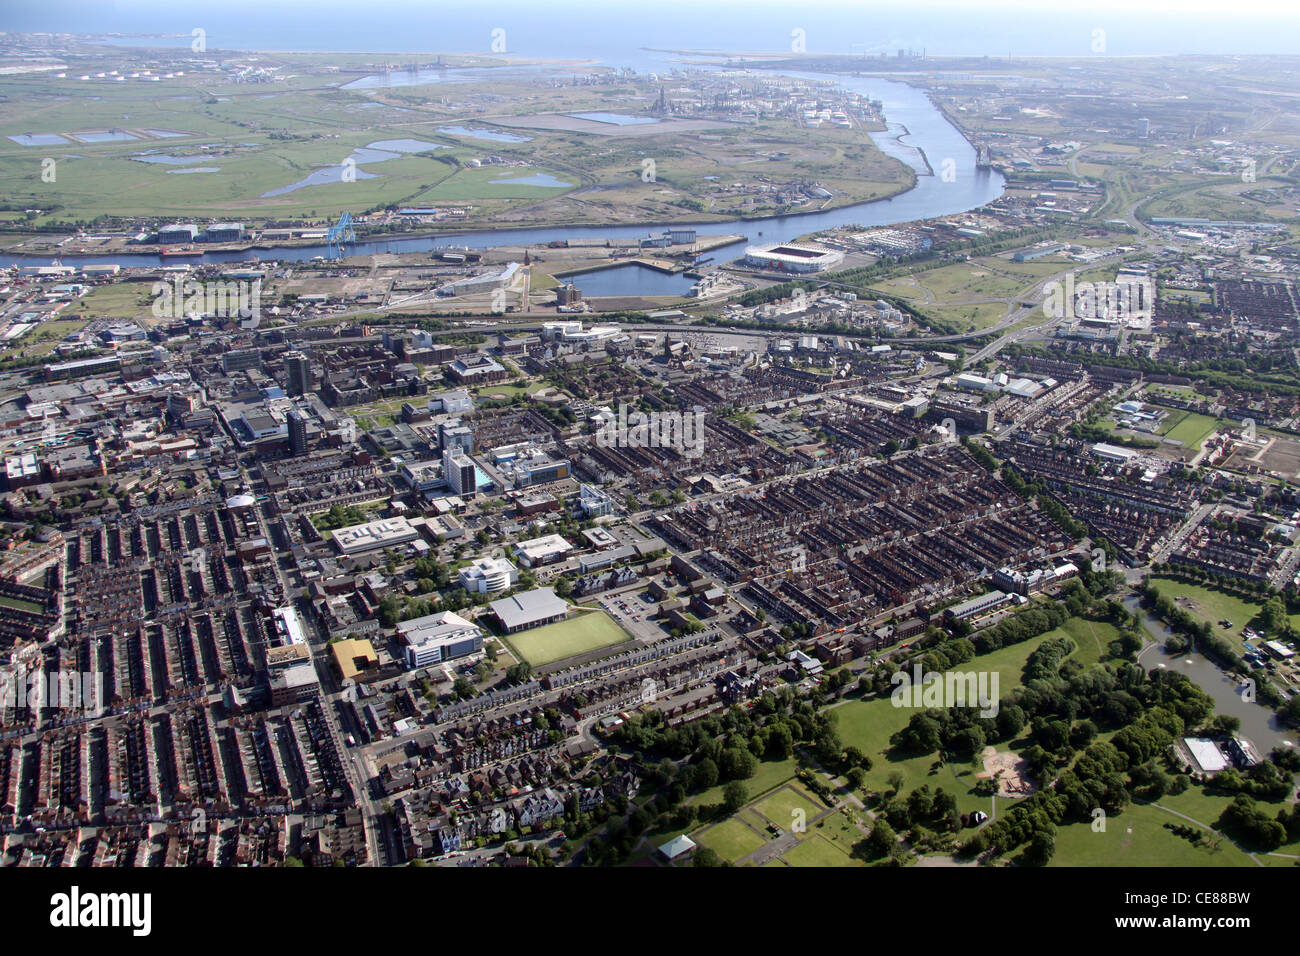 Aerial view of Middlesbrough town centre with Teesside University prominent in the foreground looking towards the River Tees towards the North Sea Stock Photo